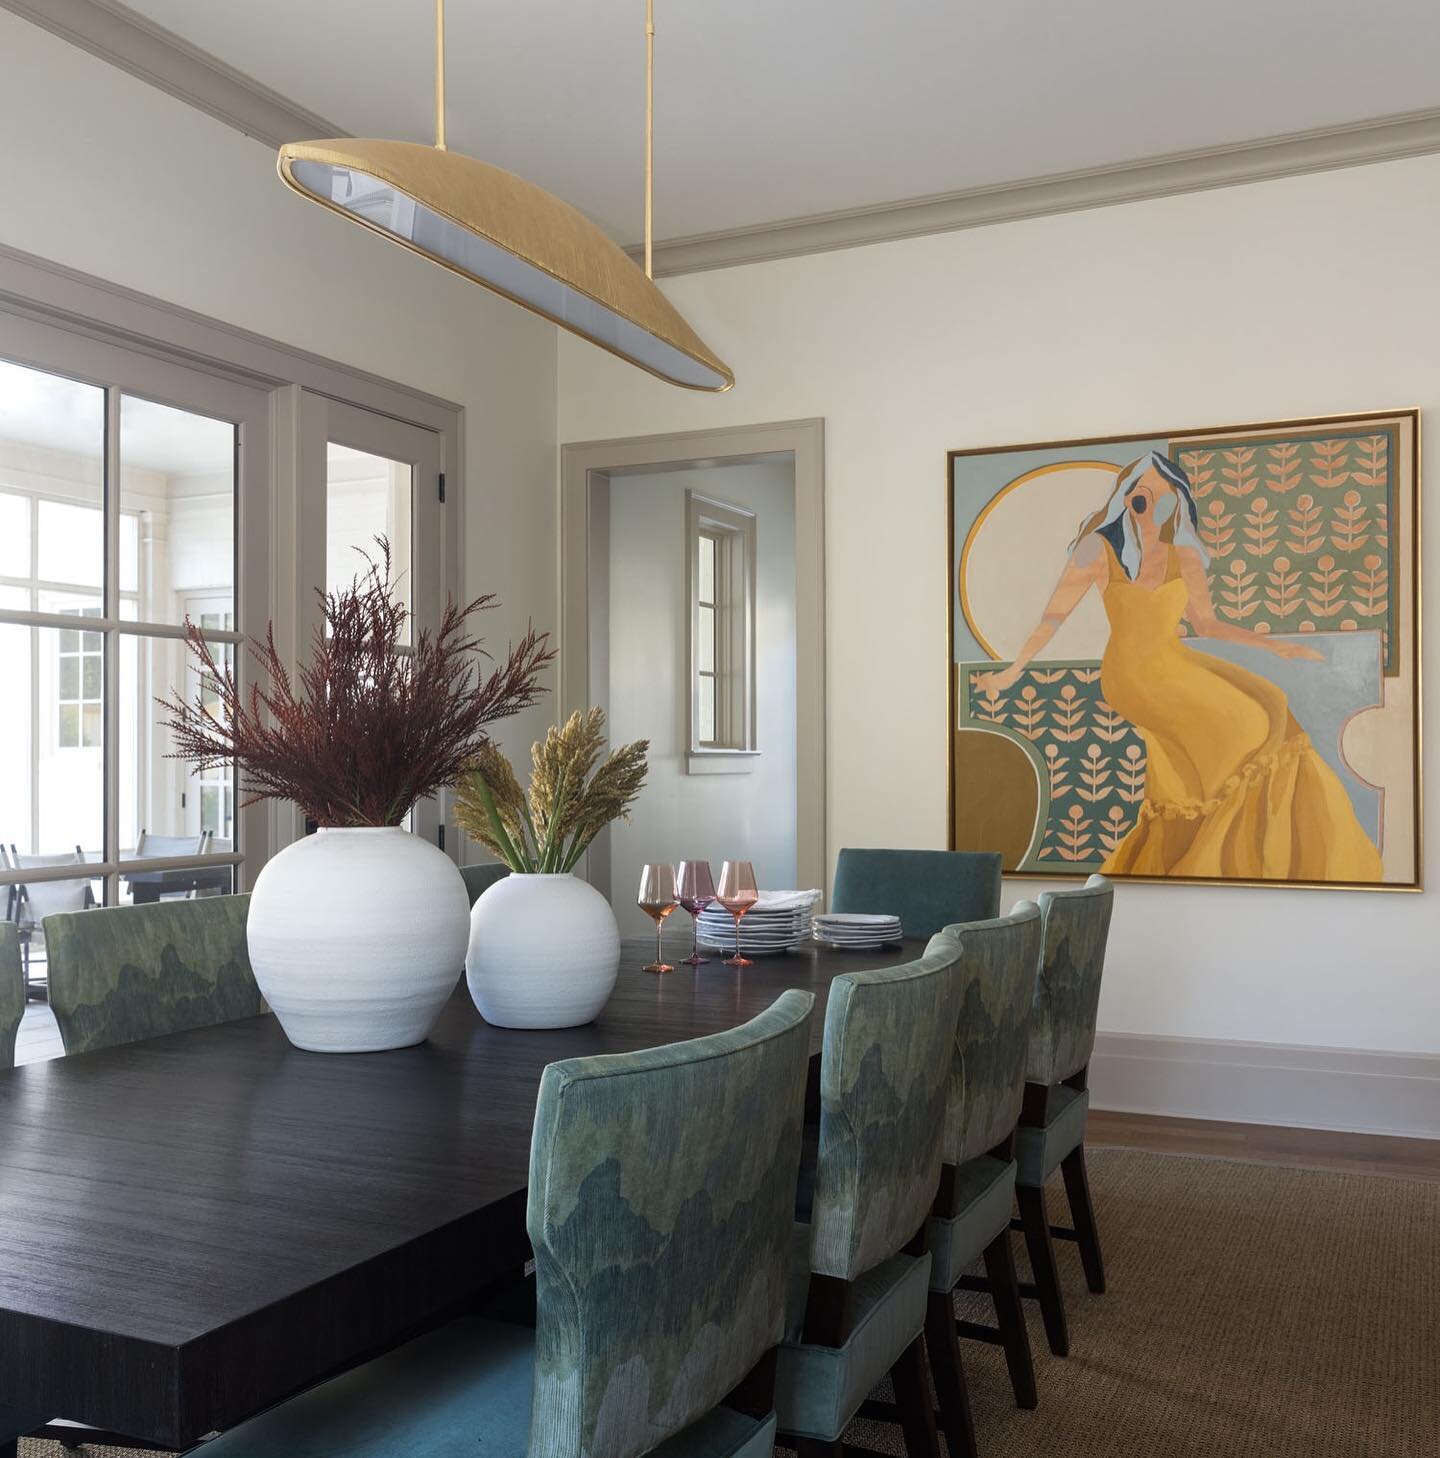 THRILLED to be included in this gorgeous home, featured in @ruemagazine - thank you @lindseyblackinteriors &amp; her fabulous team🫶&ldquo;The artwork selection drove our design of the dining room. I felt Lizzy Love&rsquo;s artwork fit these clients 